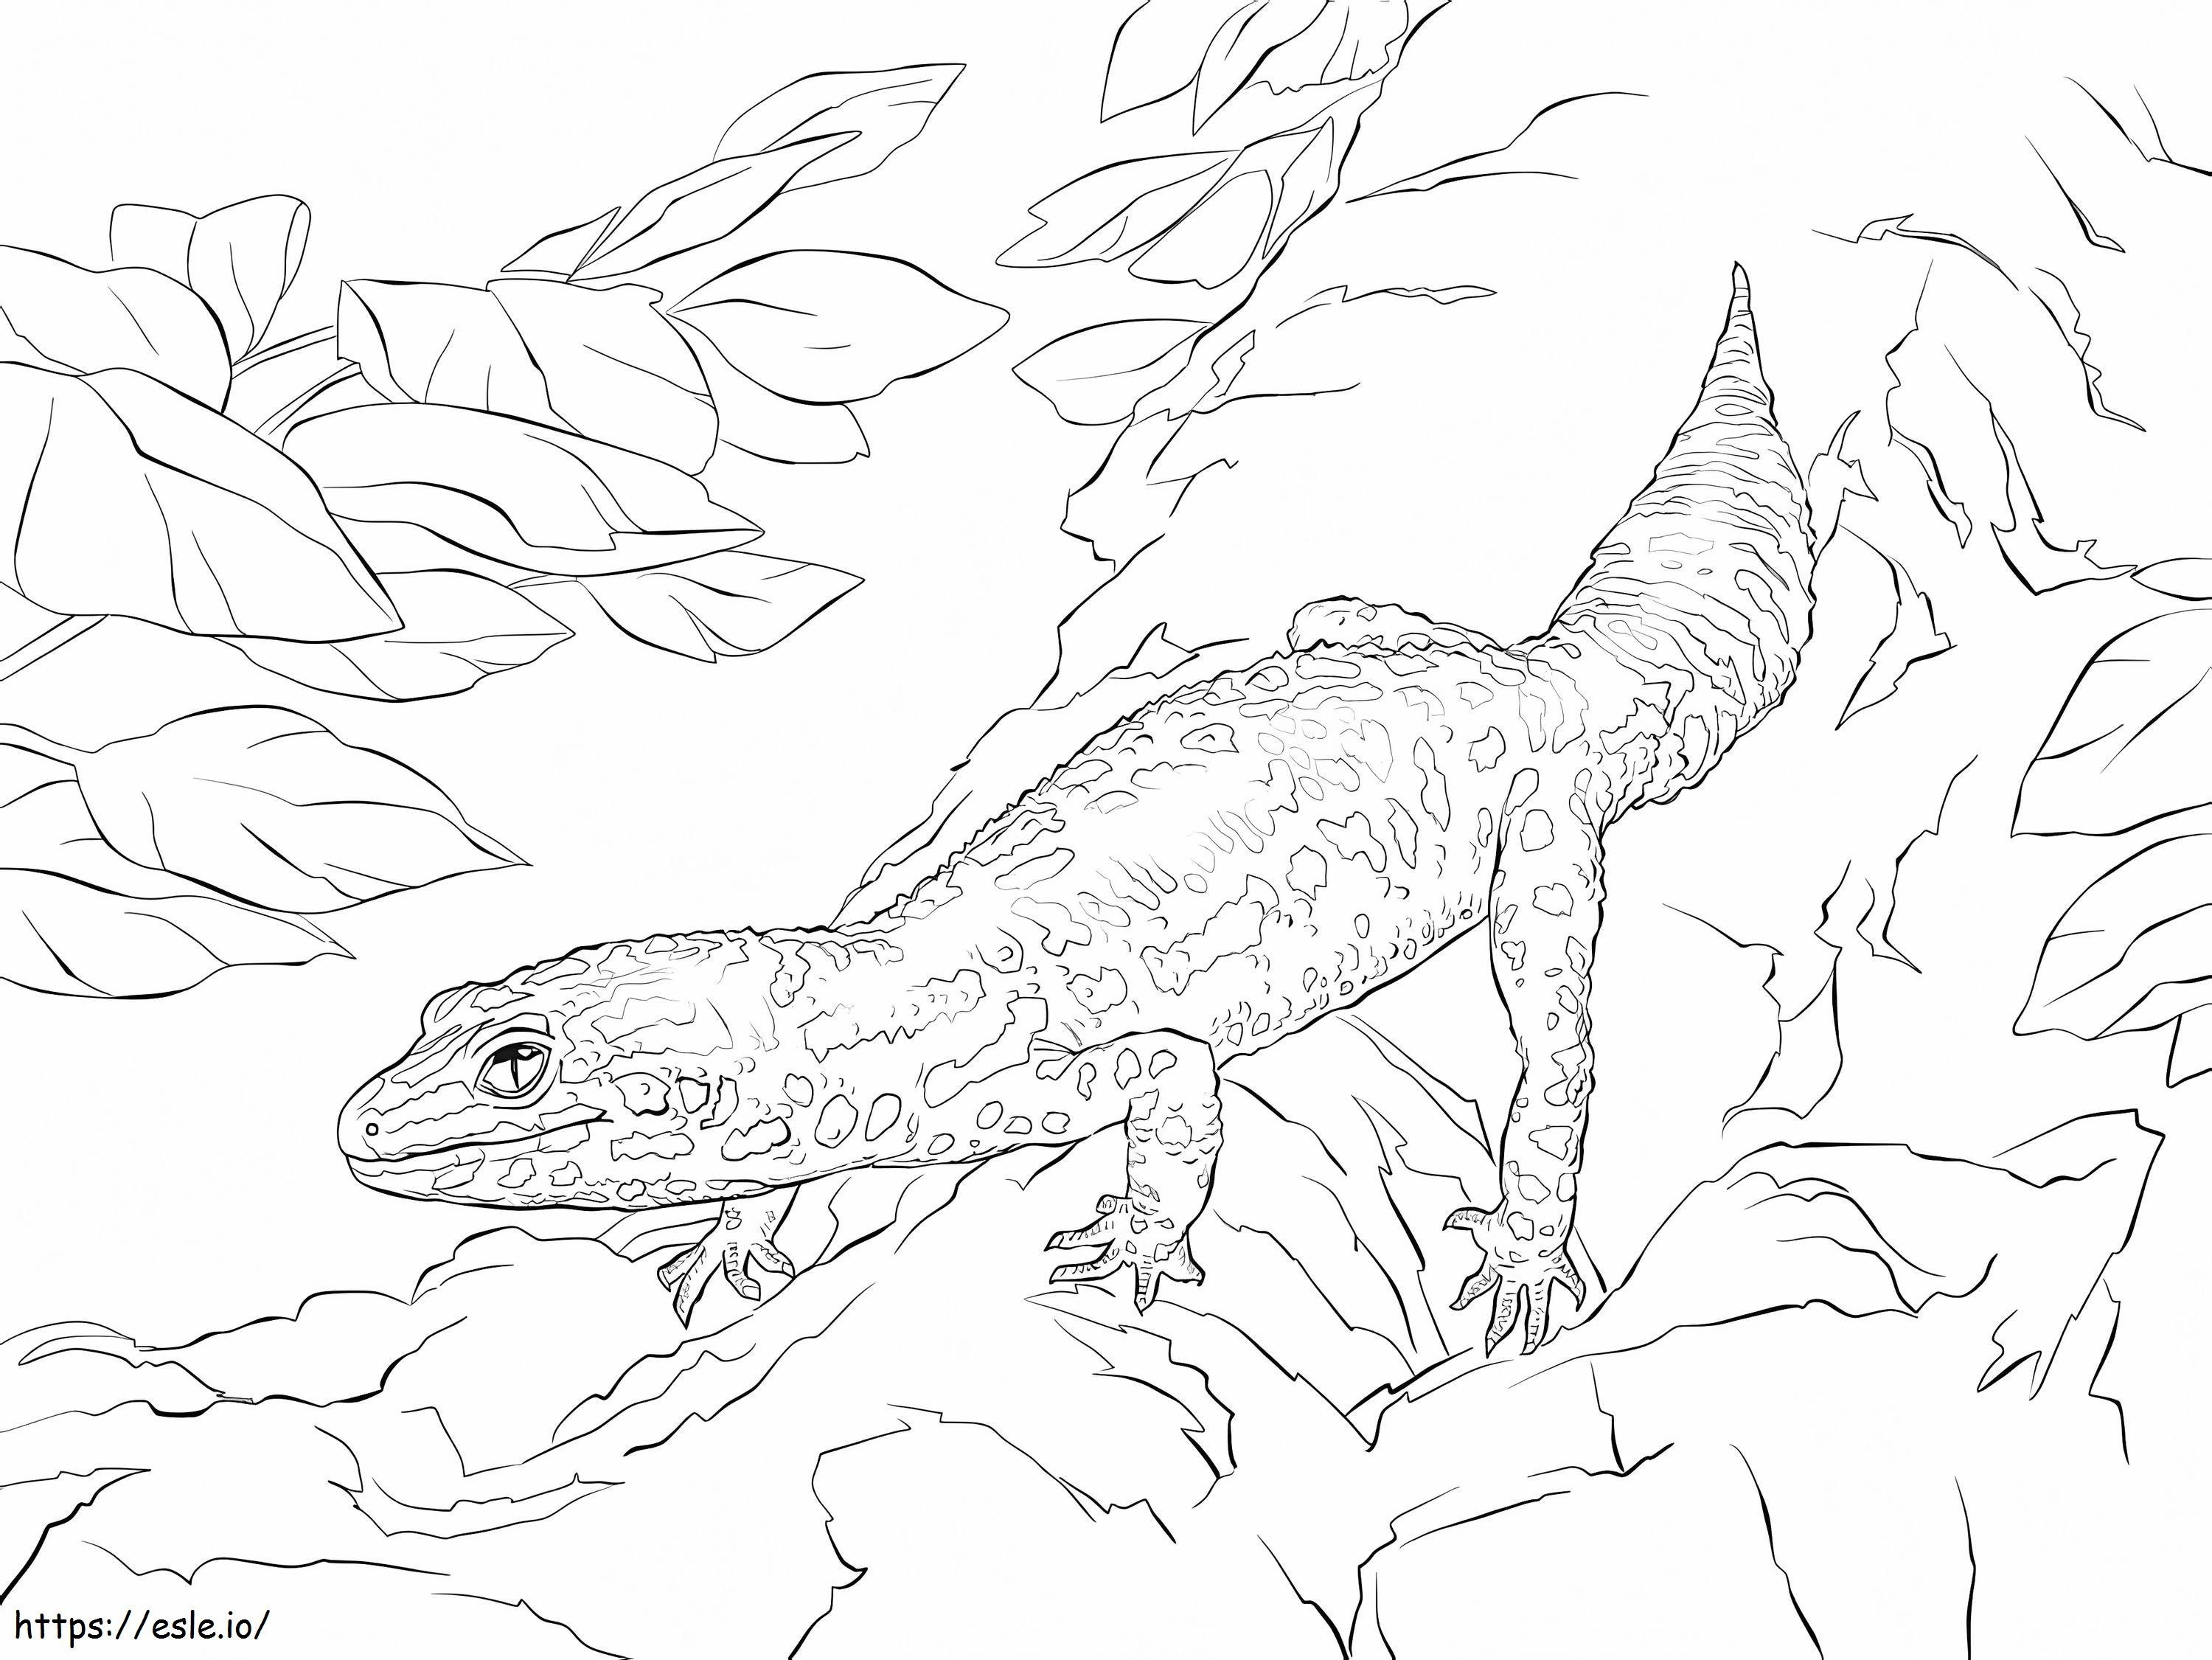 Leopard Gecko 1 coloring page